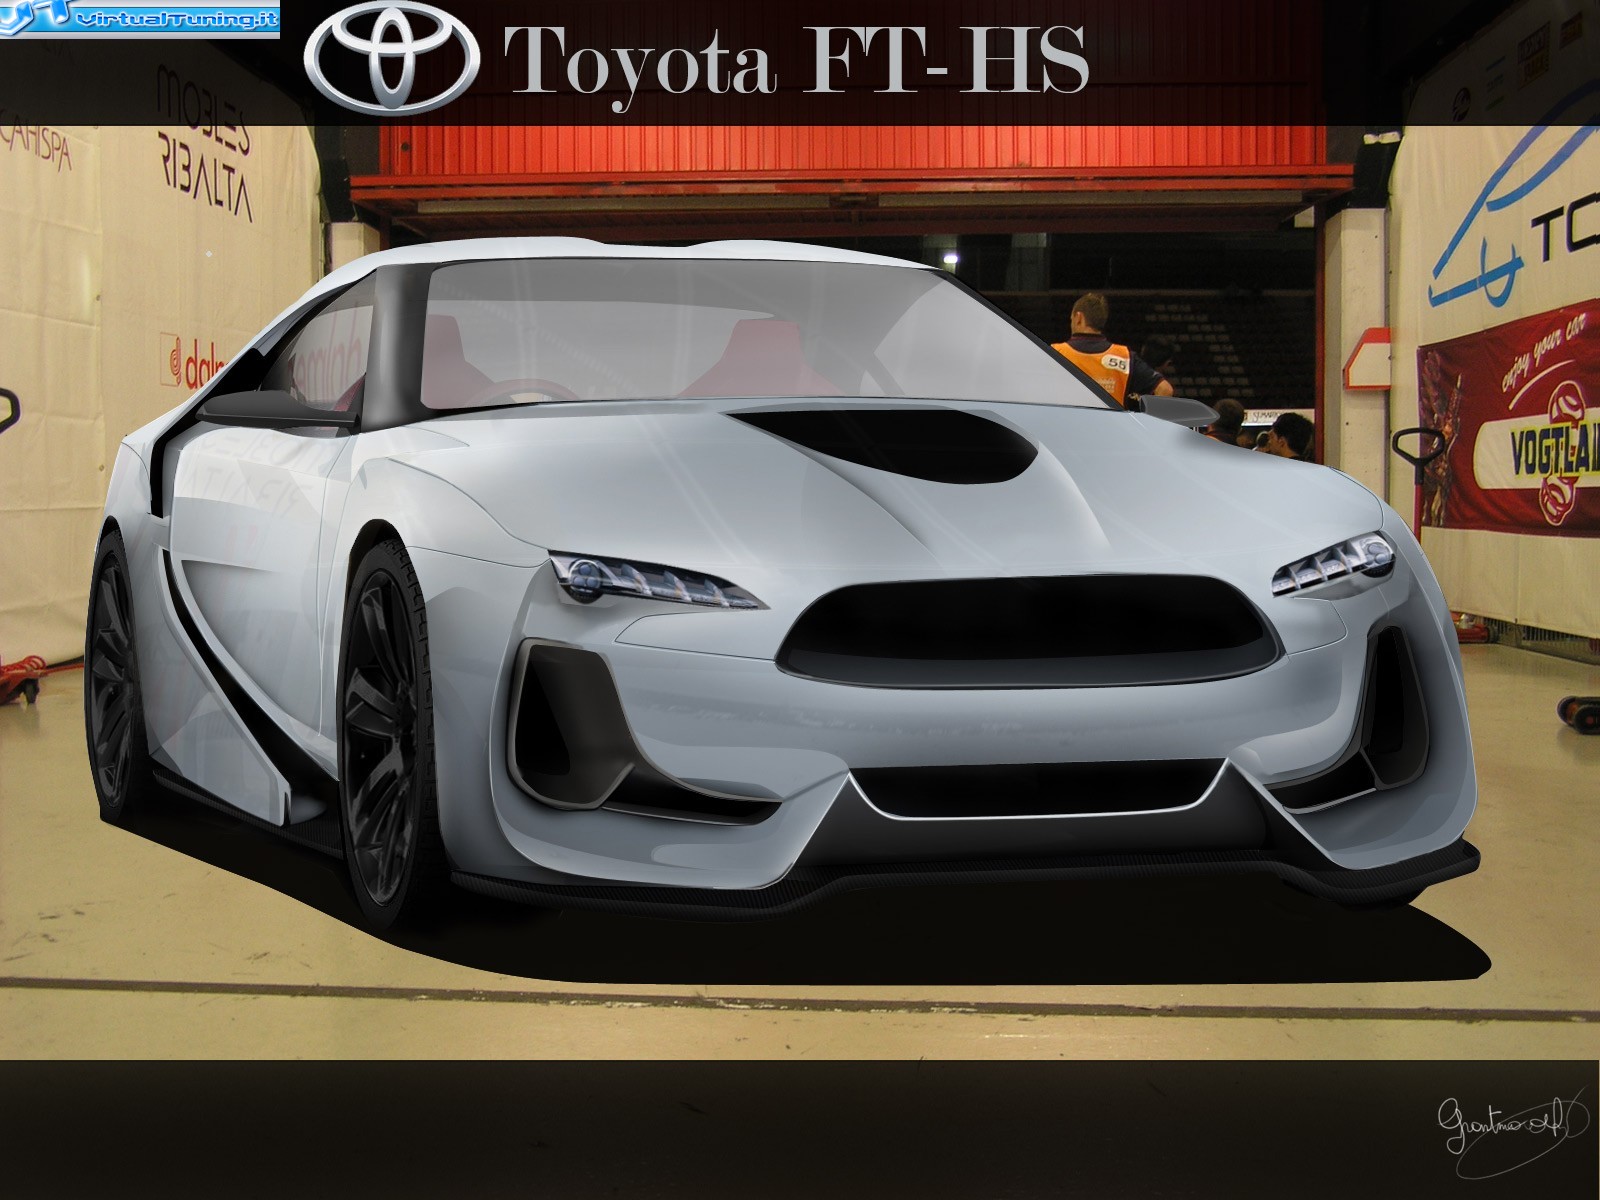 VirtualTuning TOYOTA Ft-Hs by grantmaxok